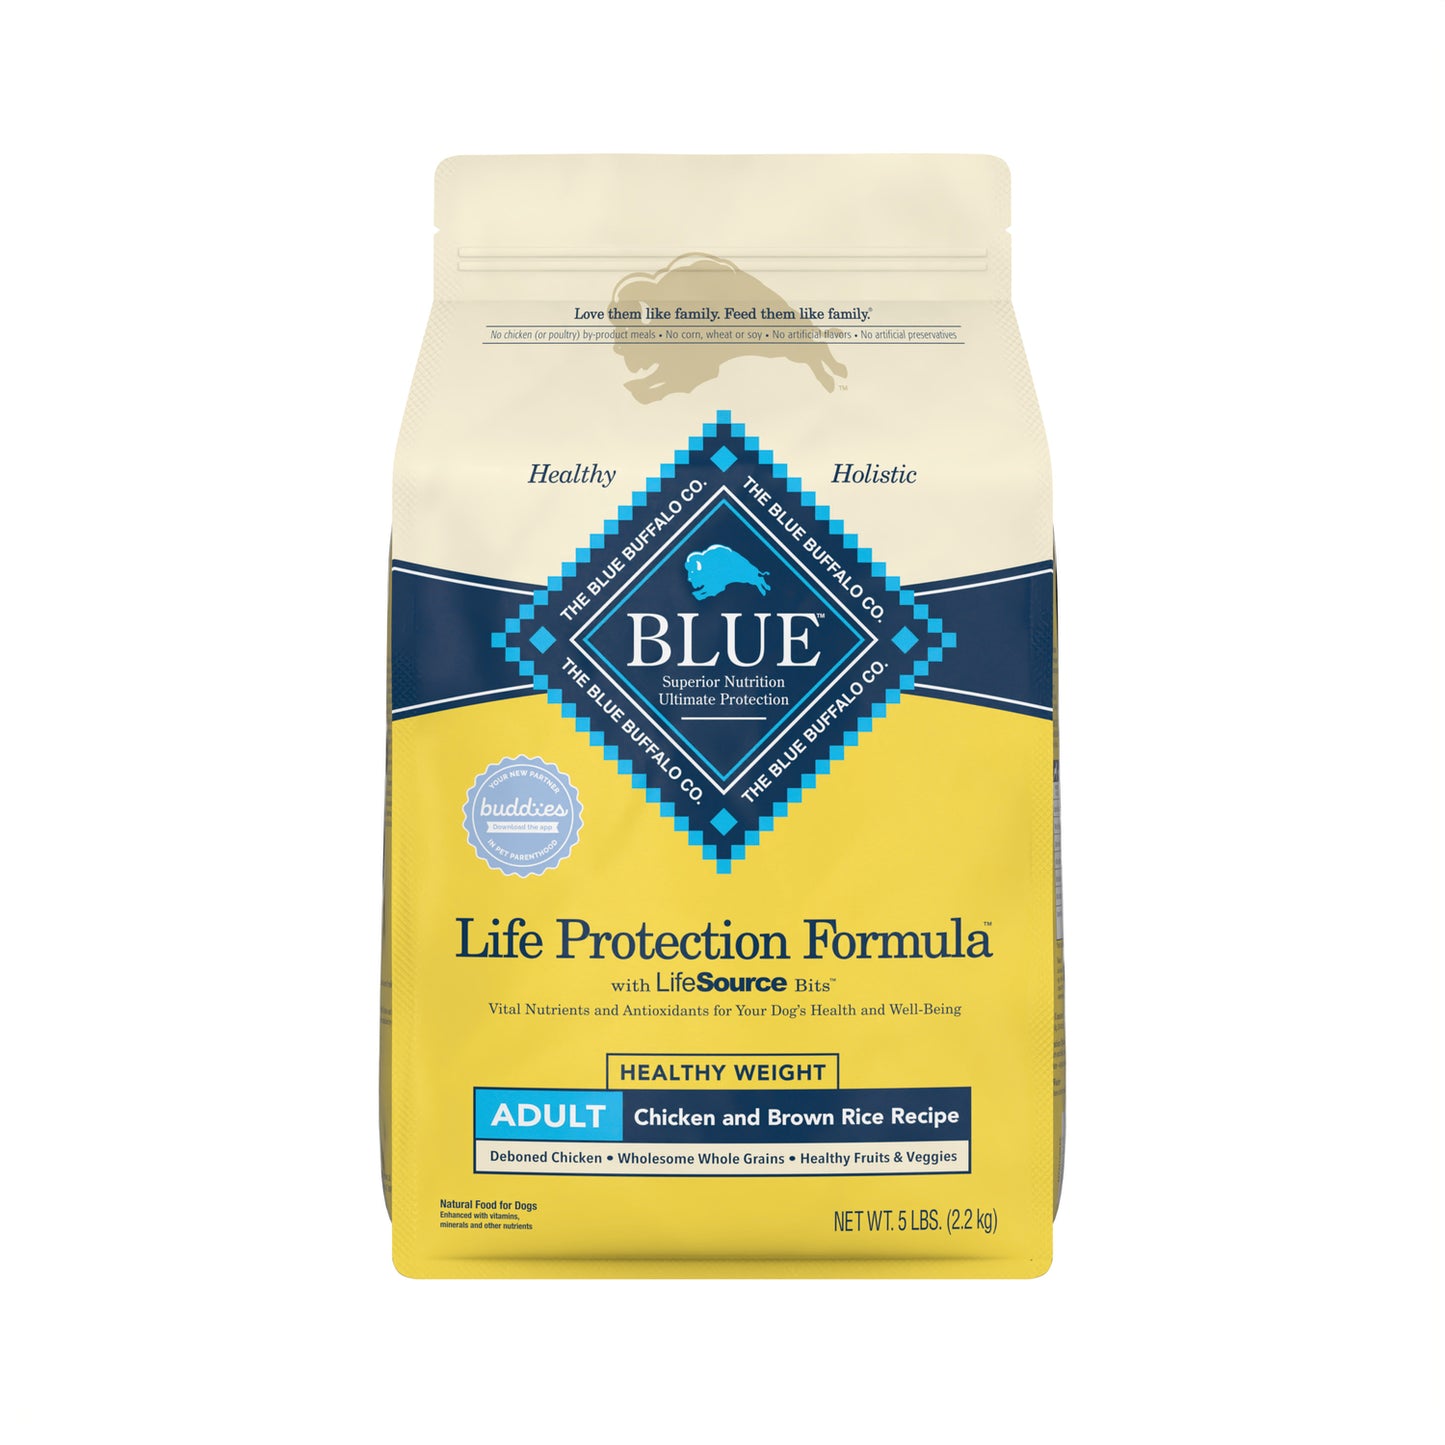 Blue Buffalo Life Protection Formula Healthy Weight Chicken and Brown Rice Dry Dog Food for Adult Dogs, Whole Grain, 5 Lb. Bag